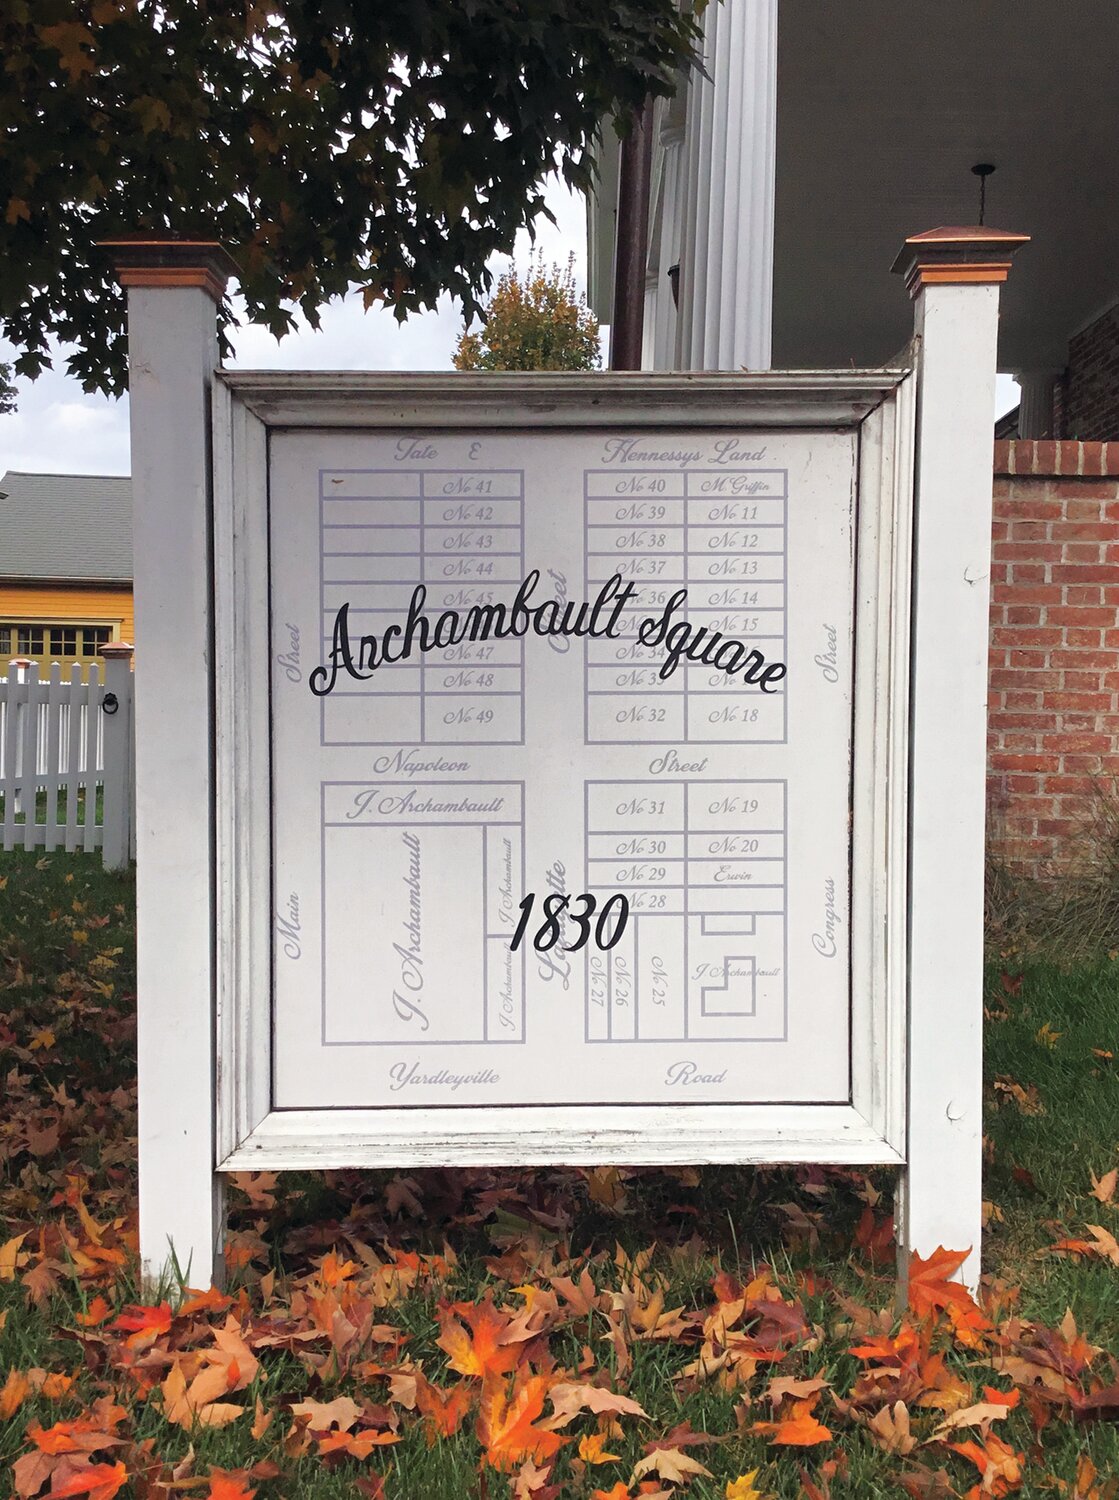 Joseph Archambault, who opened several streets and laid out building lots, was one of Newtown’s most interesting citizens.